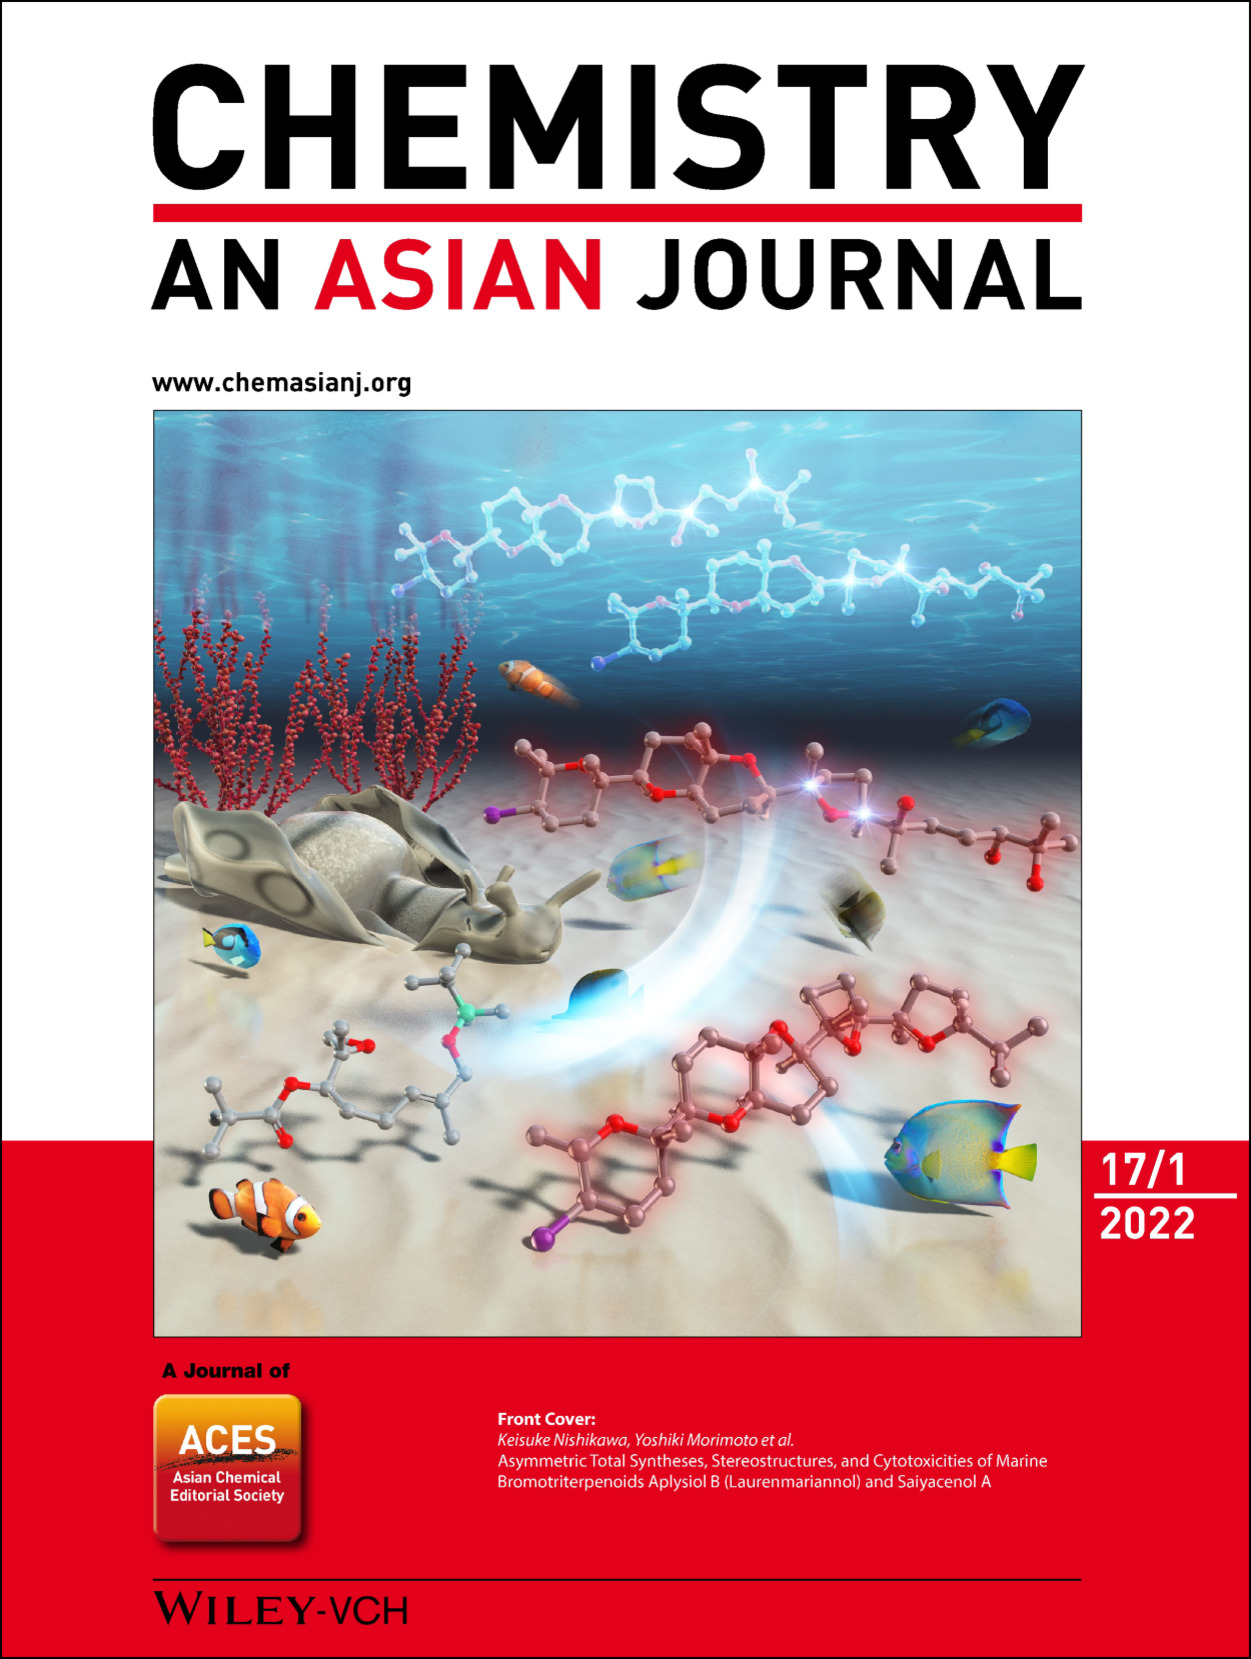 Front Cover: Asymmetric Total Syntheses, Stereostructures, and Cytotoxicities of Marine Bromotriterpenoids Aplysiol B (Laurenmariannol) and Saiyacenol A (Chem. Asian J. 1/2022)